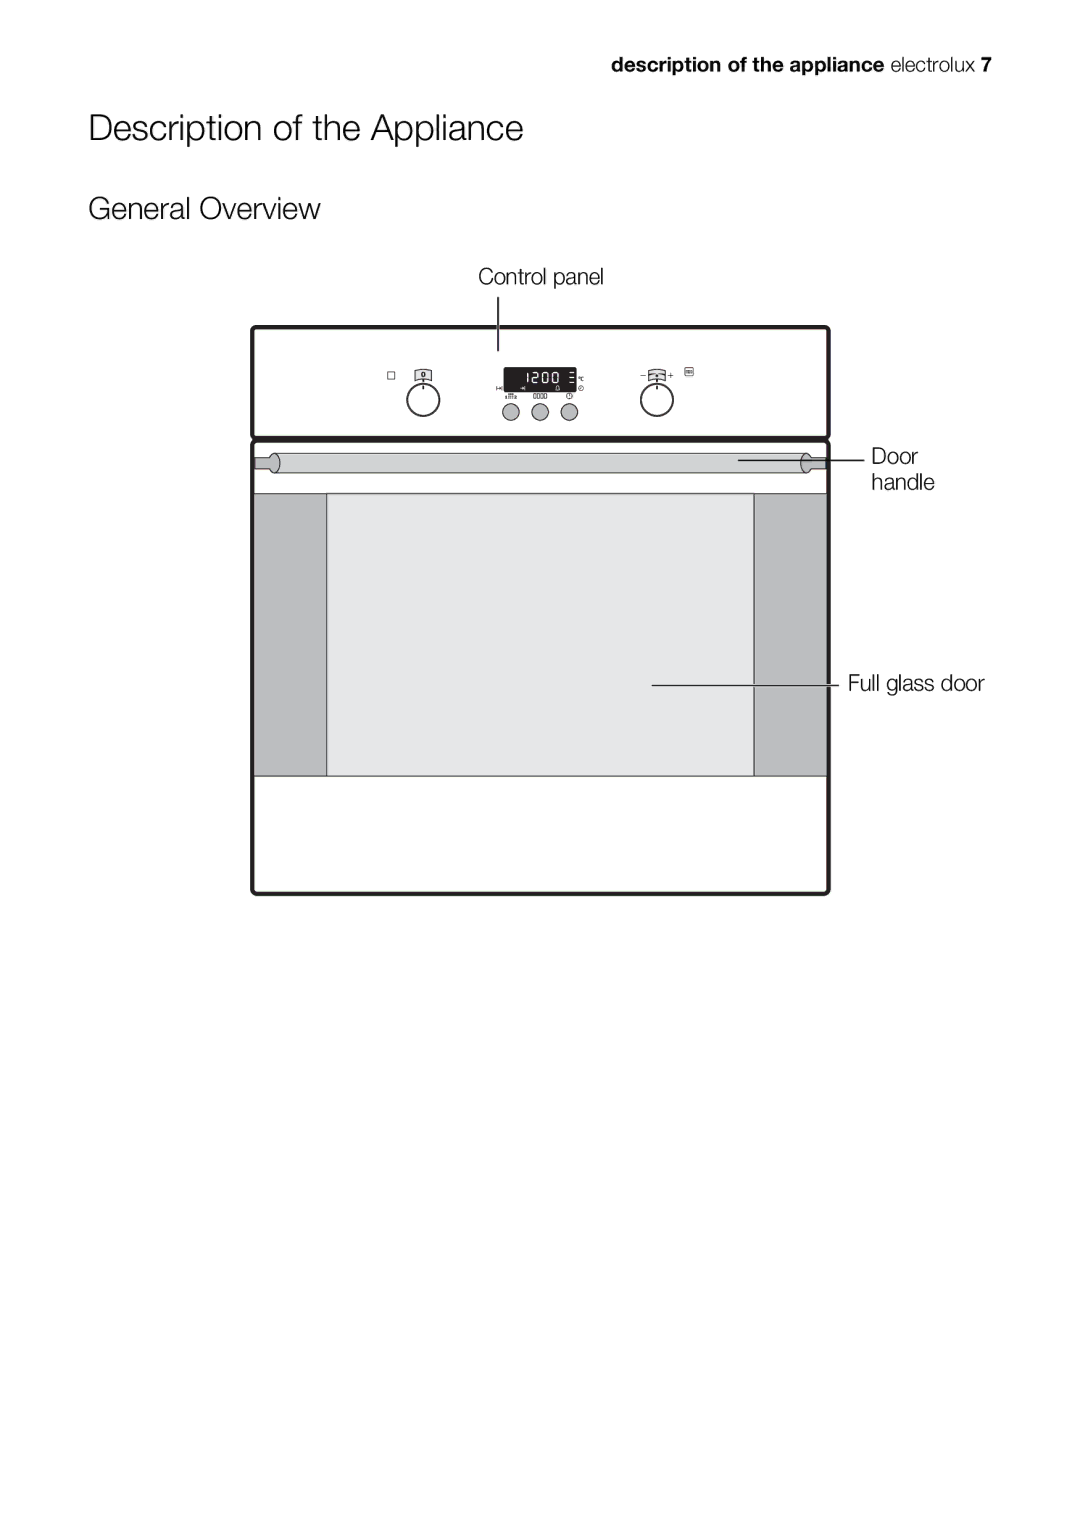 Electrolux EOC65101 user manual Description of the Appliance, General Overview 